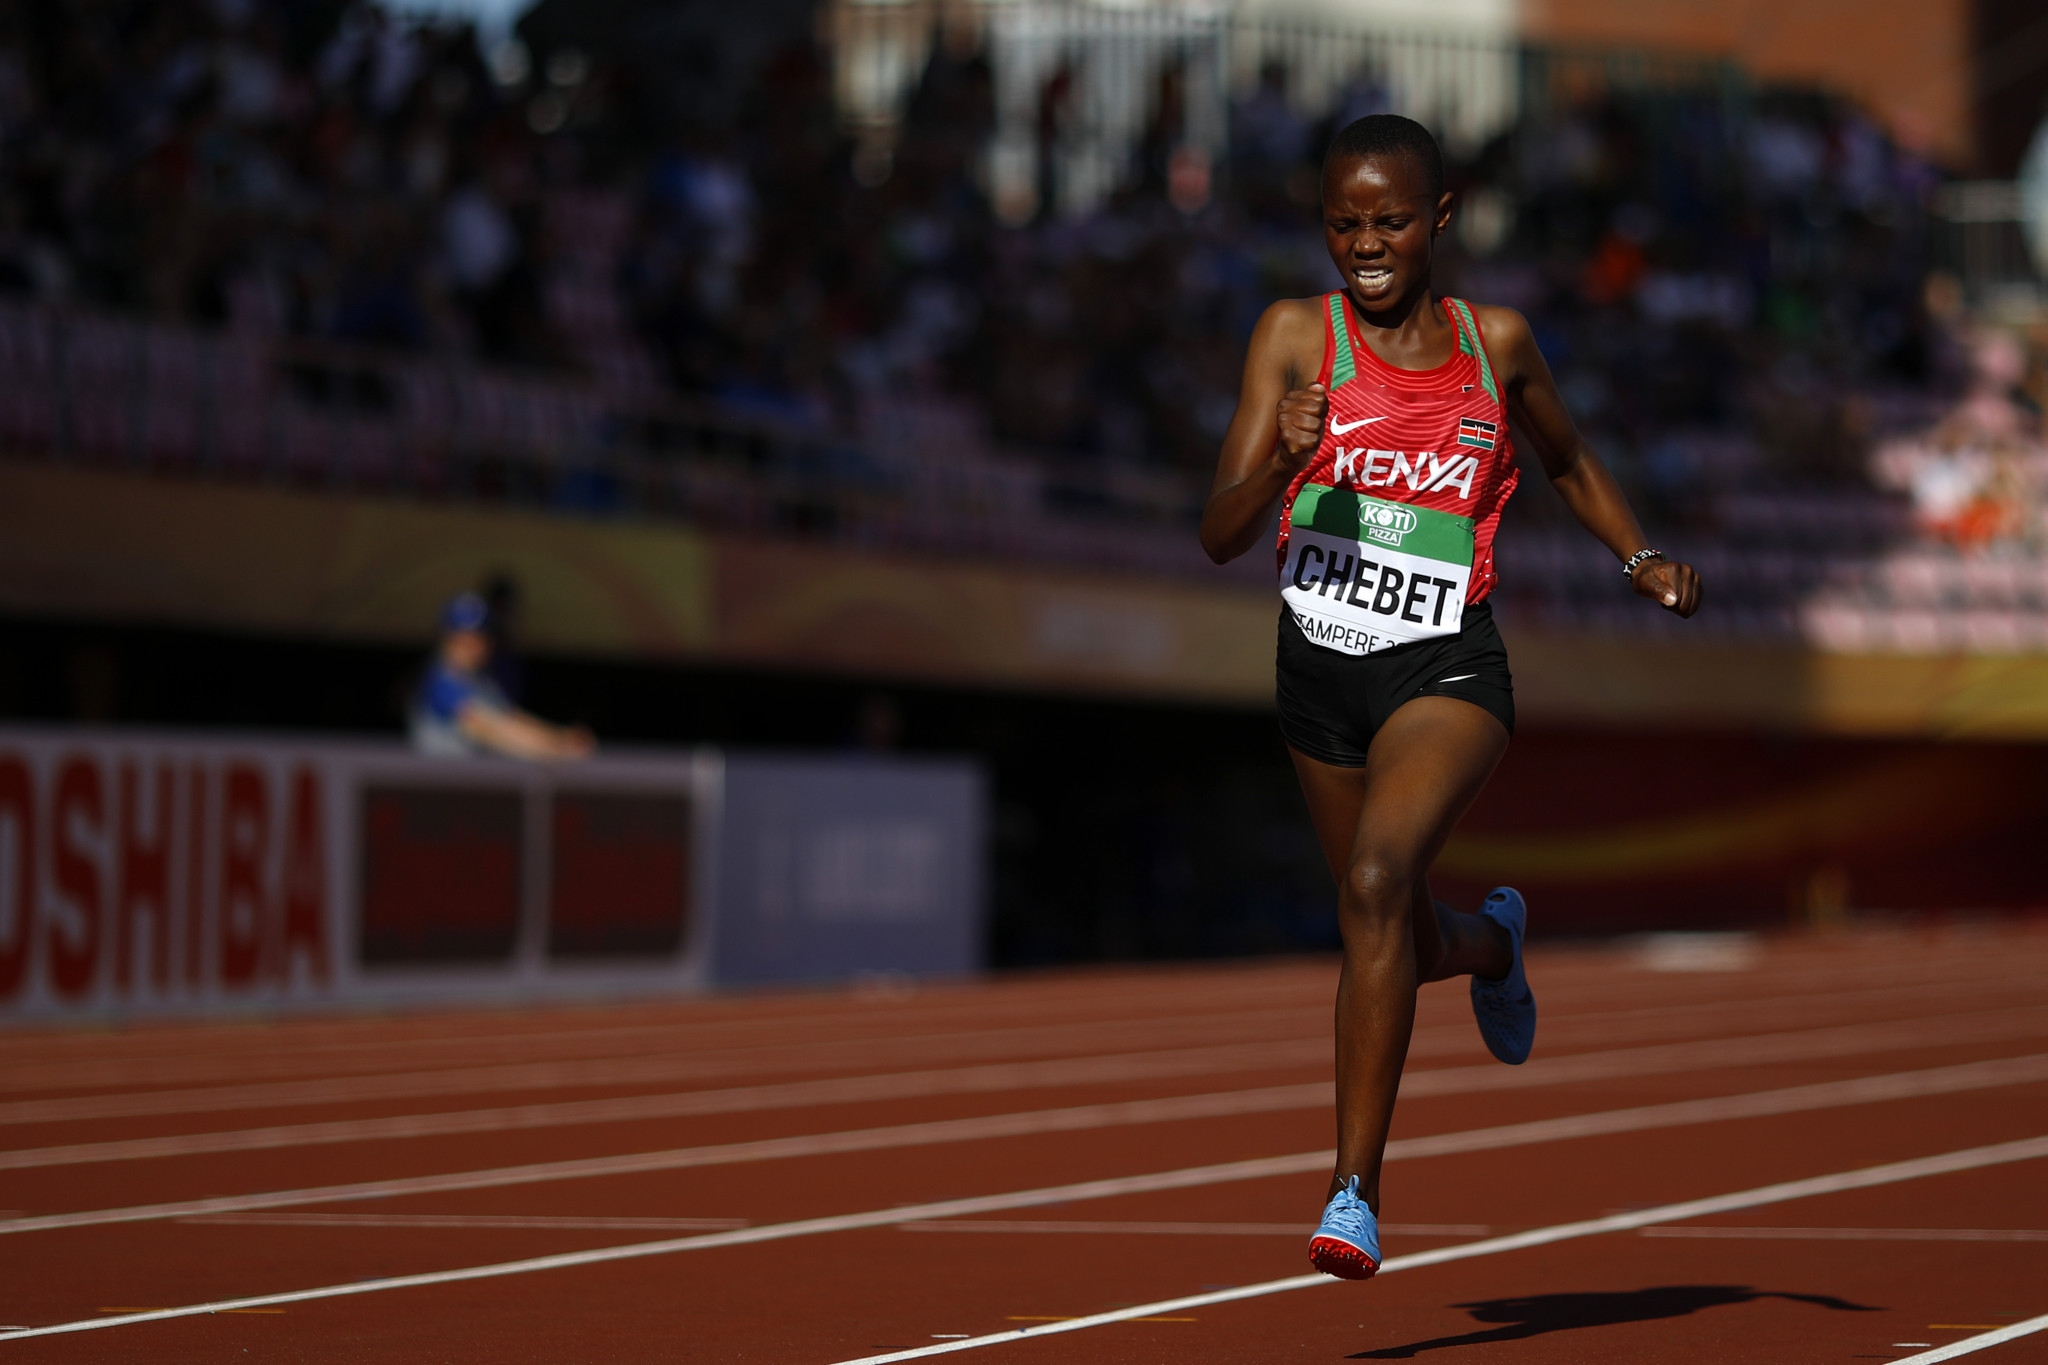 Kenya's Beatrice Chebet finished second in the women's race at the Cross de Atapuerca last weekend, and is likely to be a strong contender again in Santiponce ©Getty Images